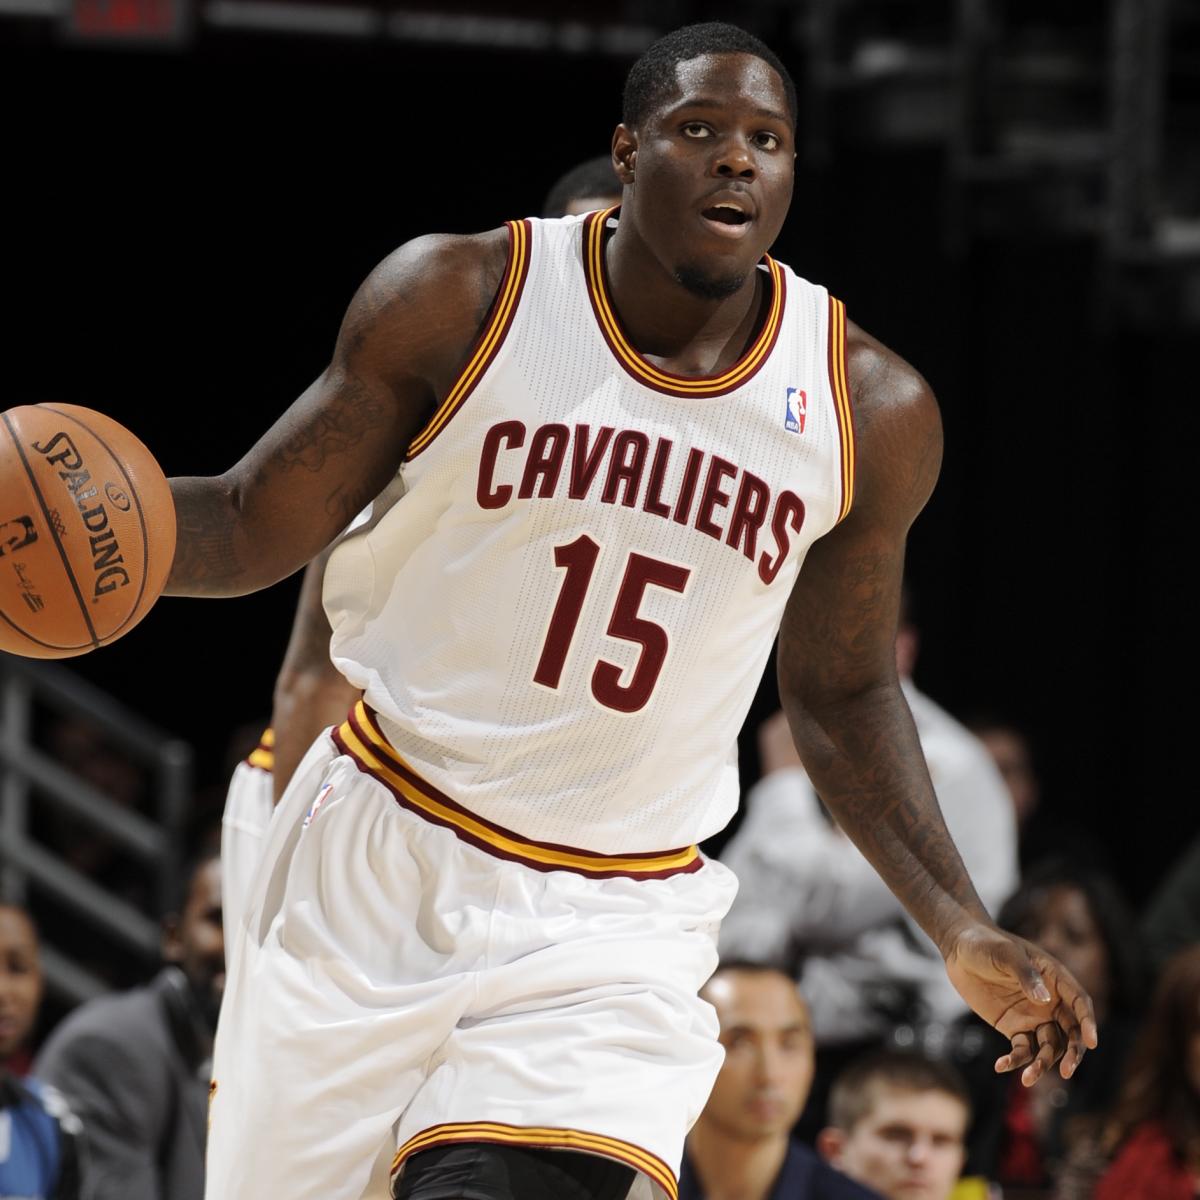 Anthony Bennett Goes No. 1 In 2013 NBA Draft To Cleveland Cavaliers